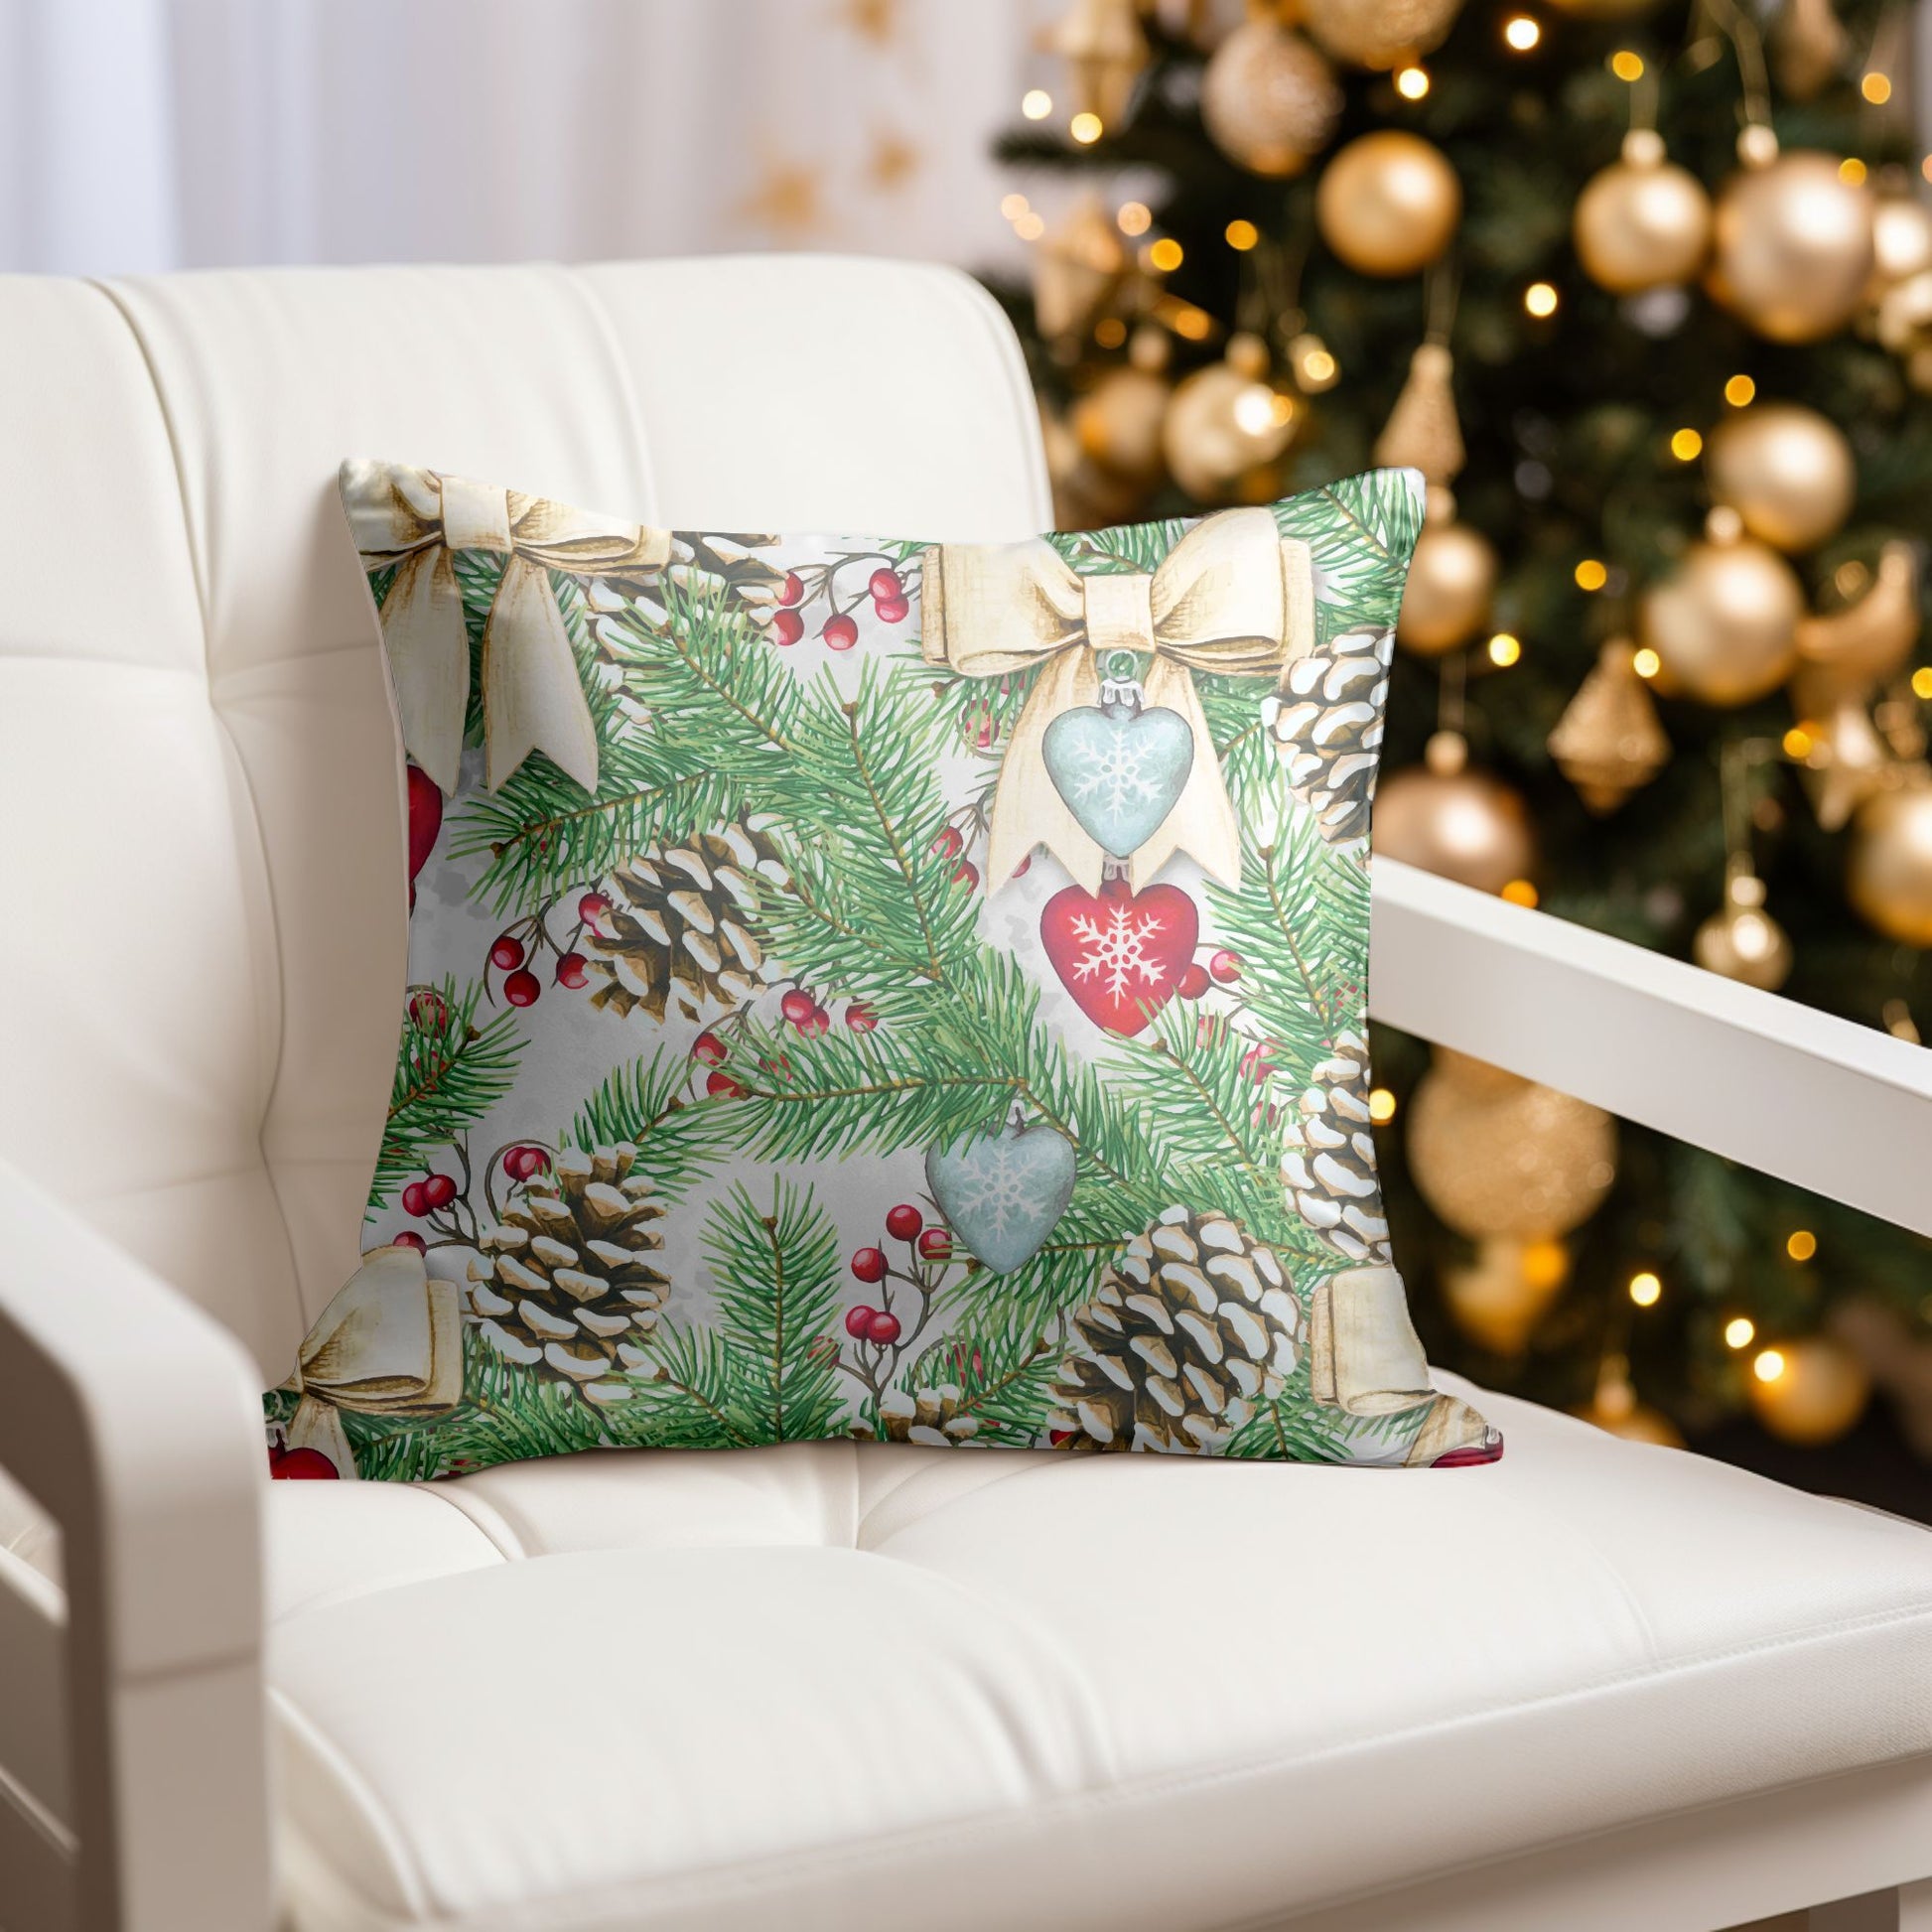 Detail of the Green Christmas Design on the Festive Pillow